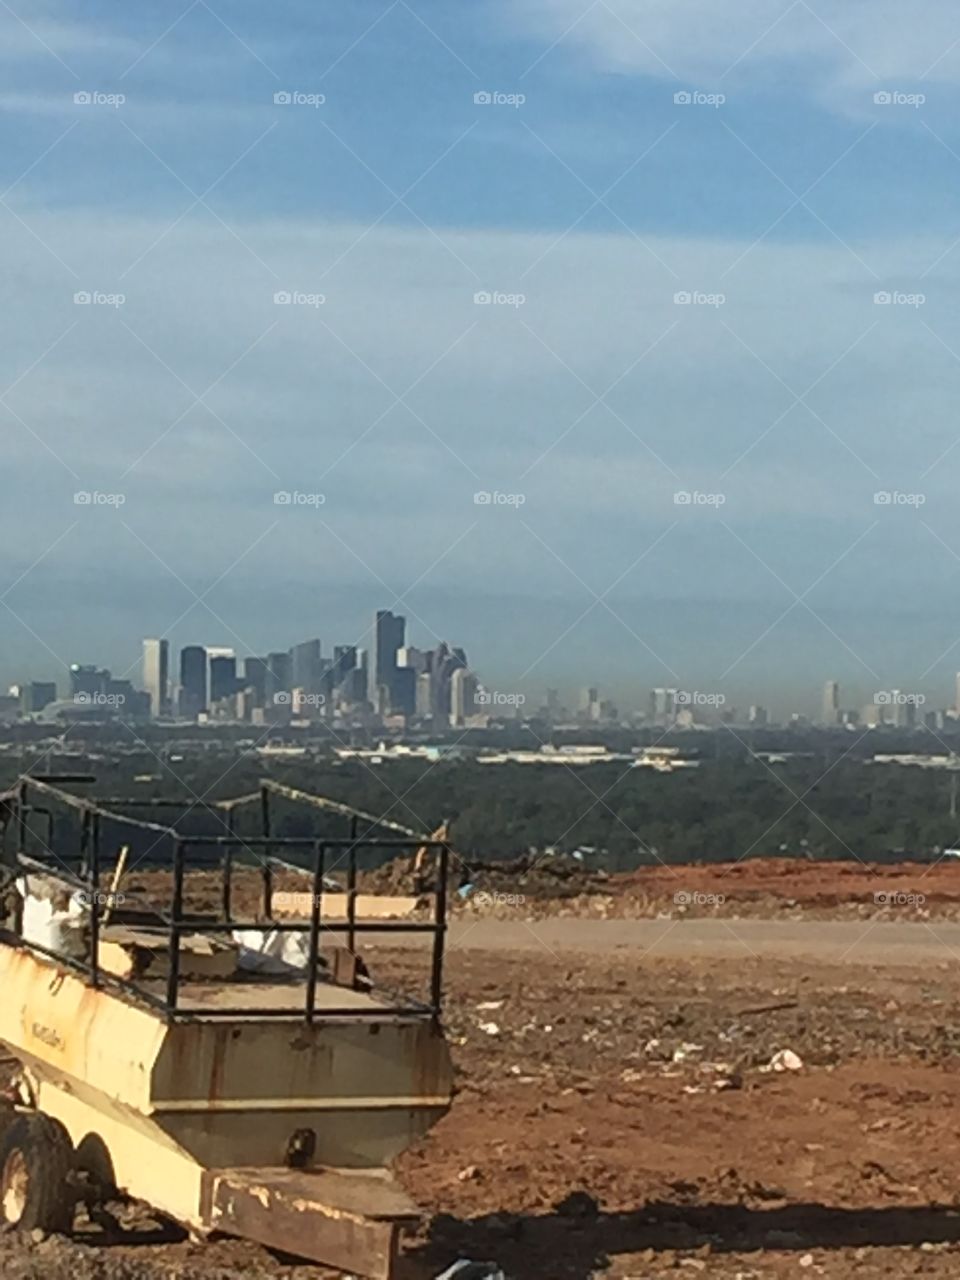 The View of downtown Houston Texas from McCarty Landfill